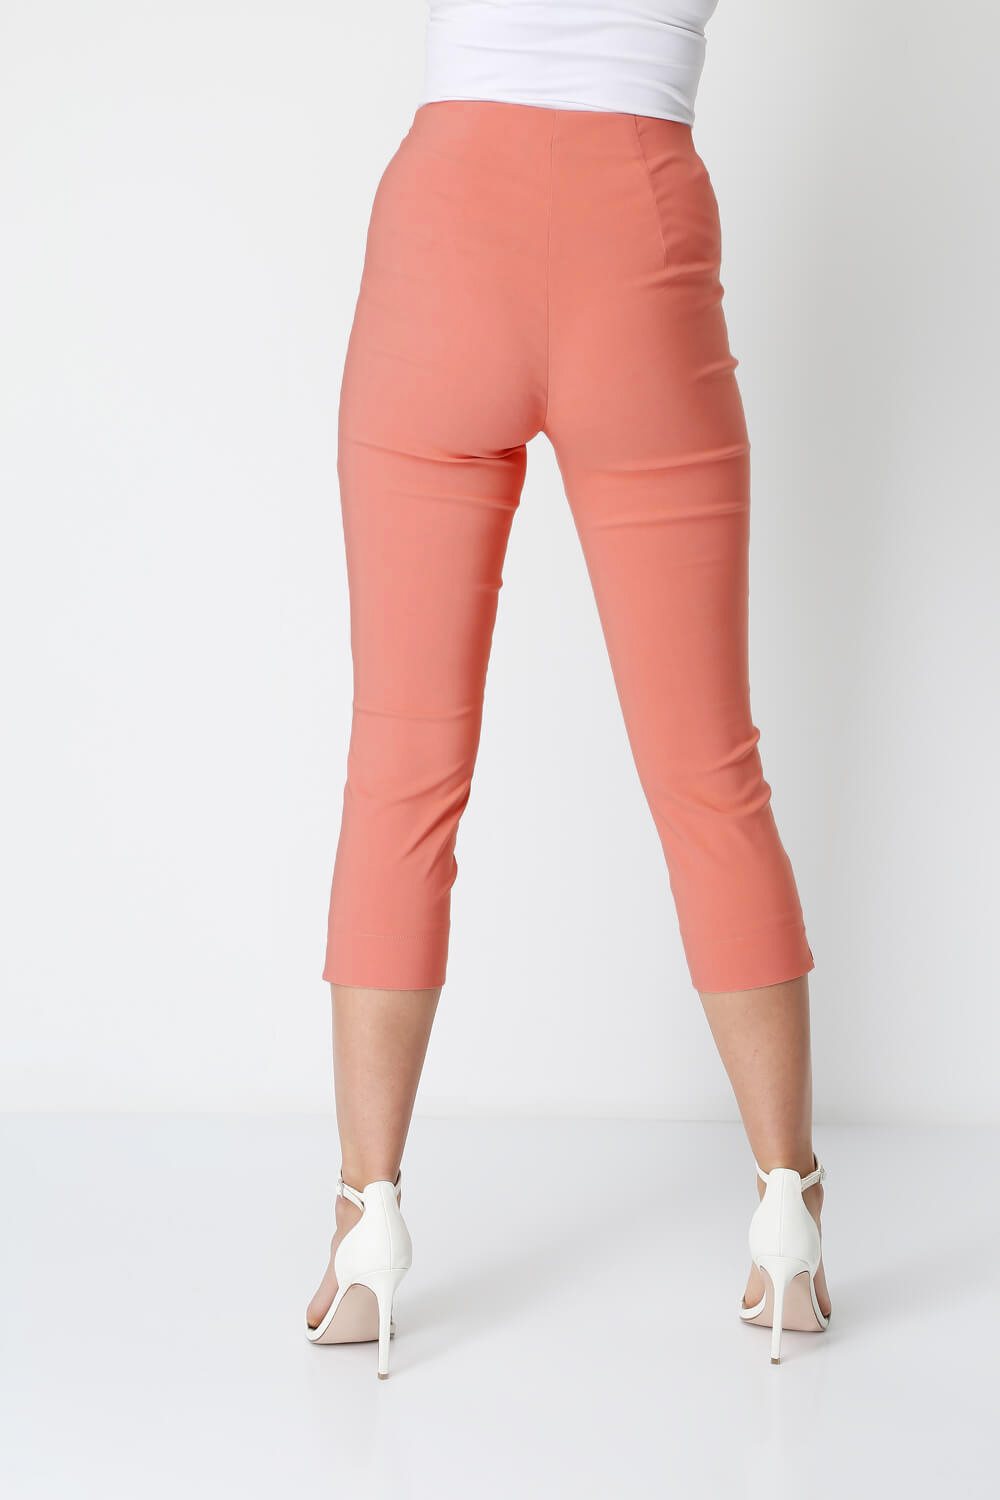 Salmon Pink Cropped Stretch Trouser, Image 2 of 6